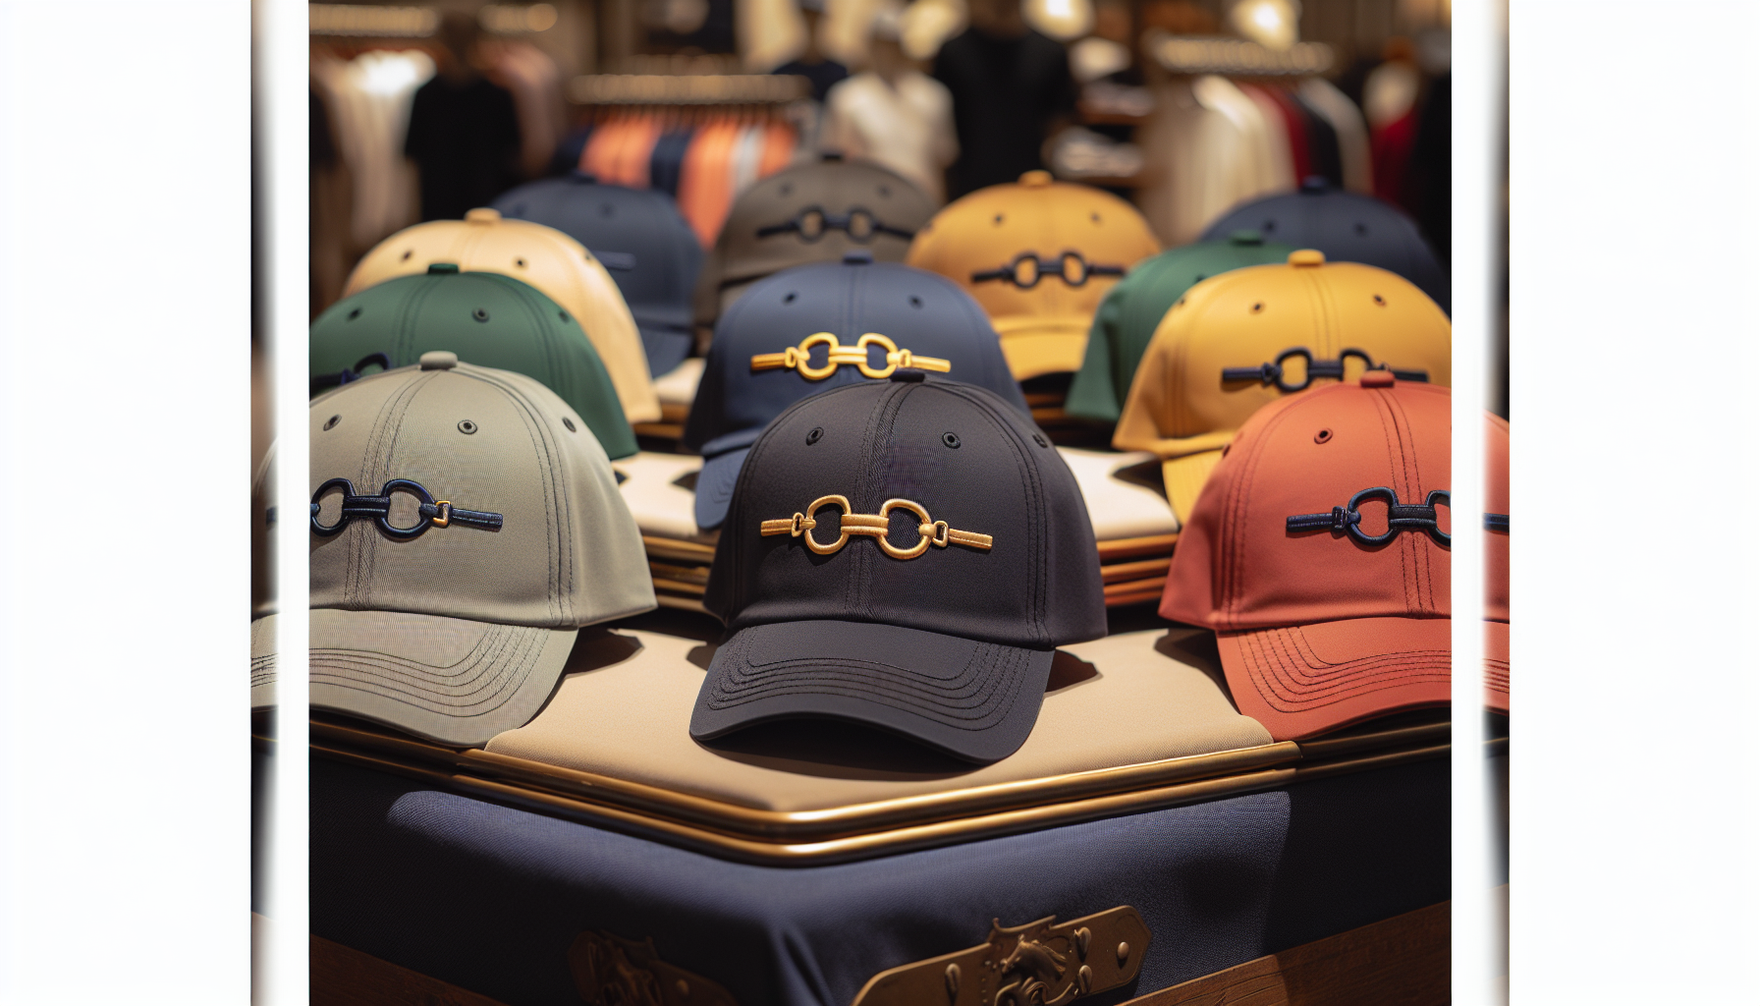 A collection of stylish baseball caps on a display stand. Each cap features an embroidered design of a snaffle bit, reflecting a charming equestrian flair. The caps come in a variety of colors, includ